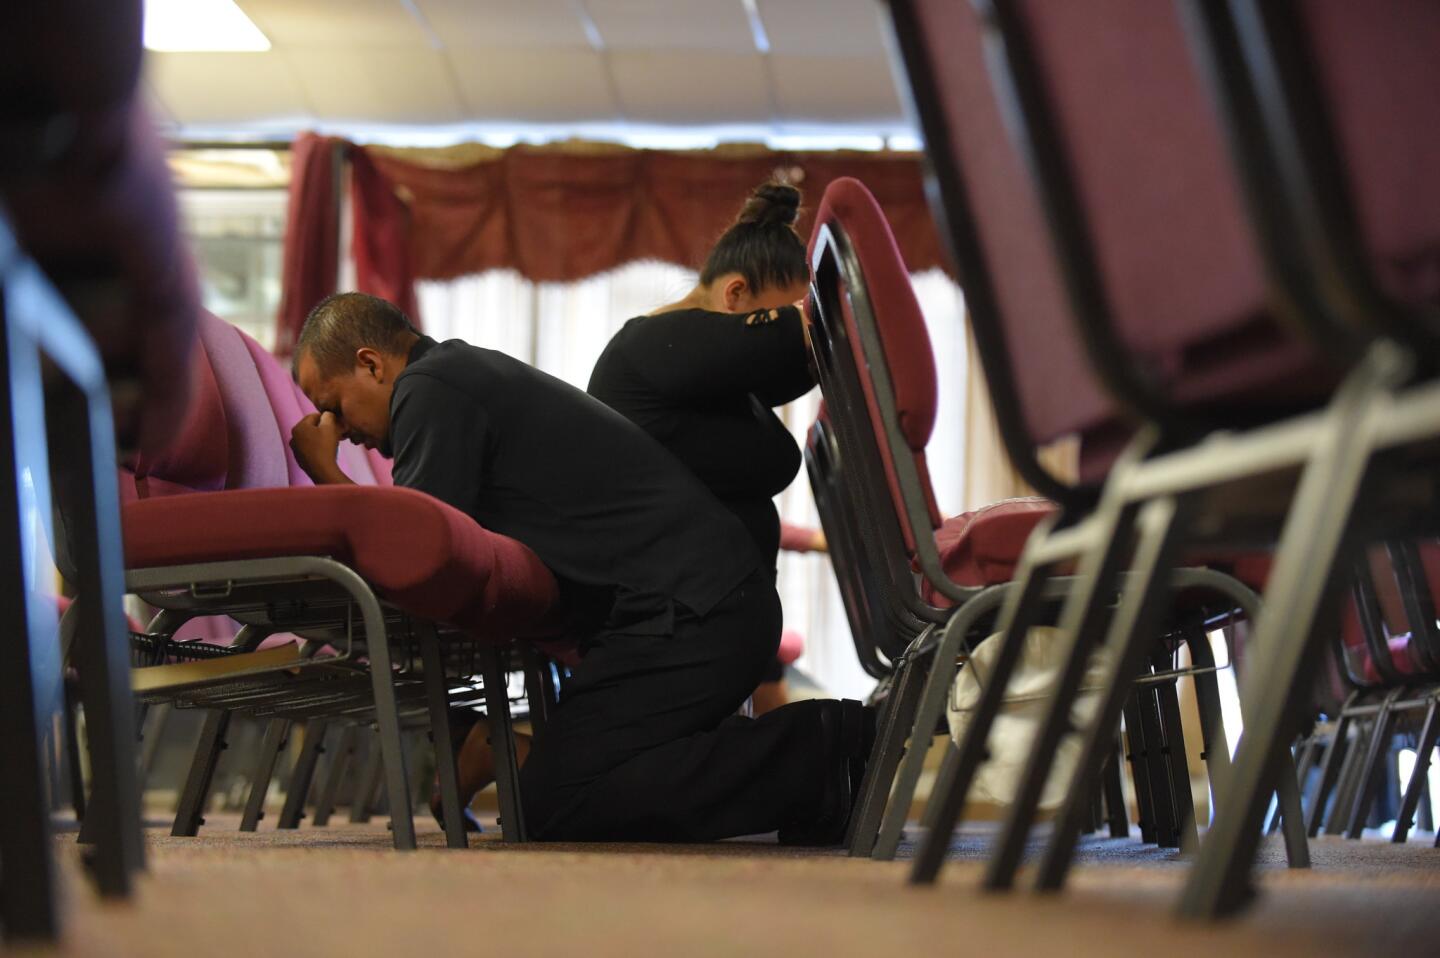 From left, Alvin Lobo and Celena Rivera kneel during a family meeting for Jose Oscar Hidalgo Romero, one of the three people killed in Wednesday's attack in Edgewood. The service was held at The Church of Pentecostal Inc. in Aberdeen.